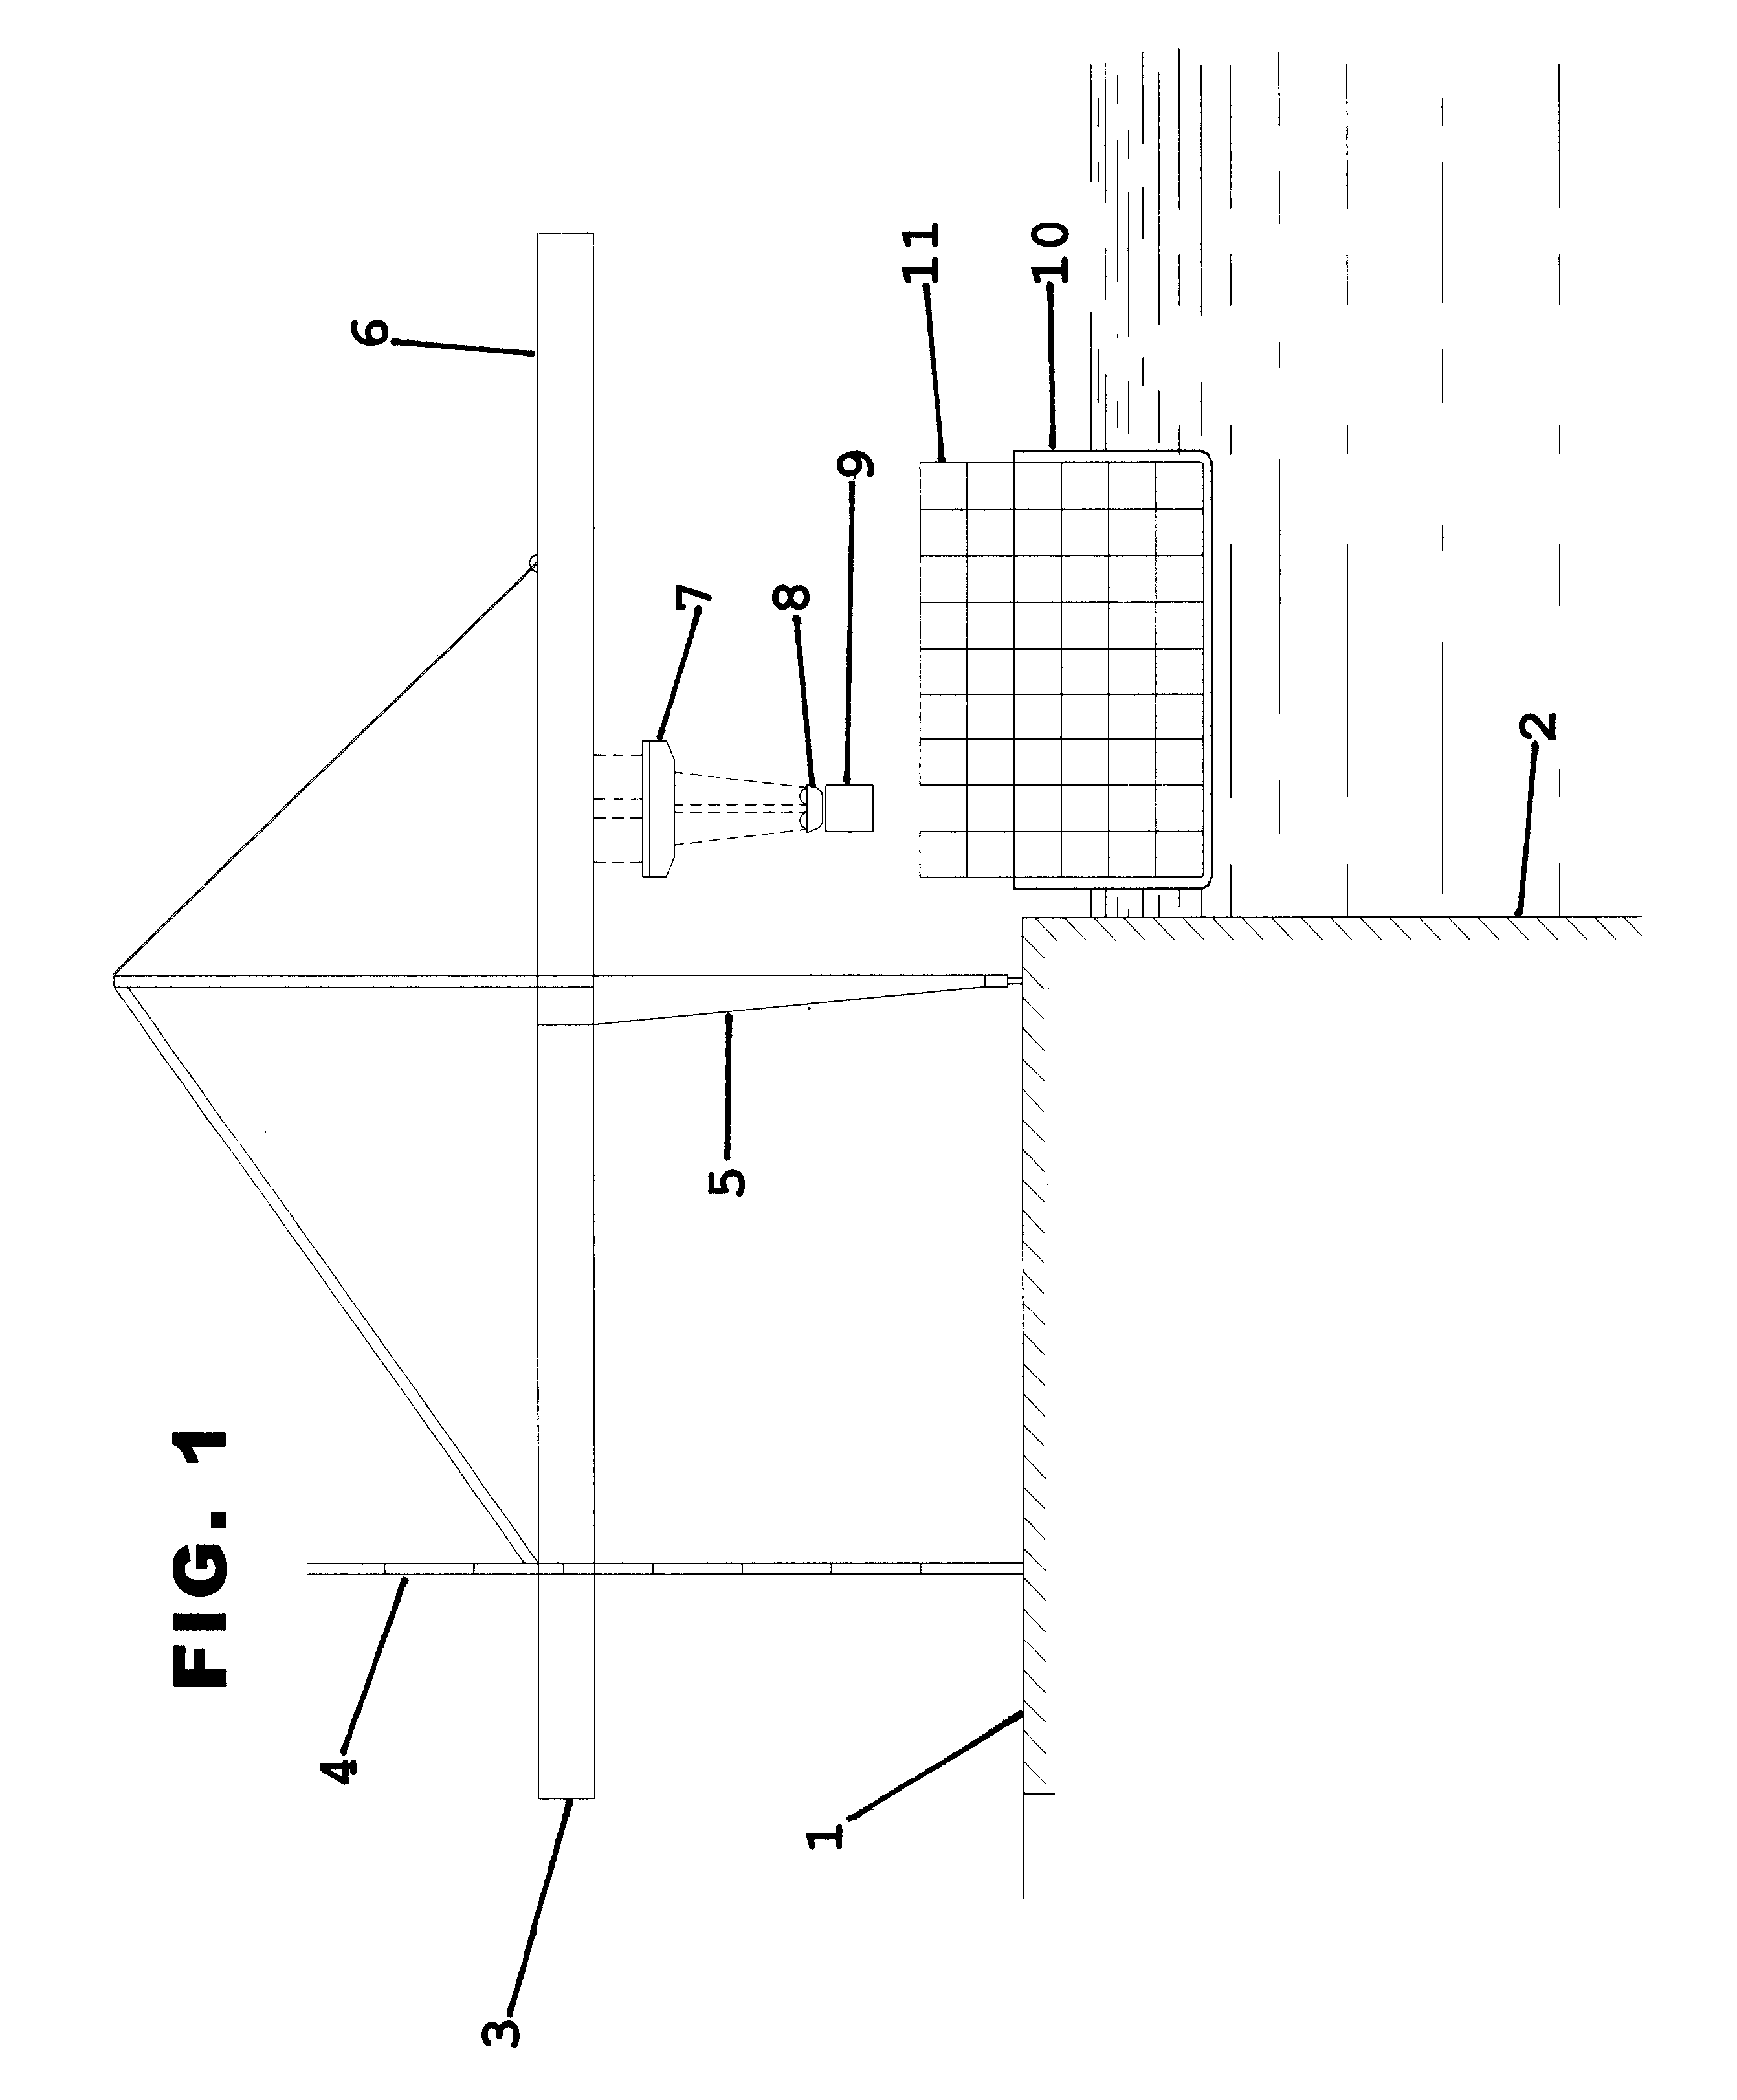 Container crane radiation detection systems and methods